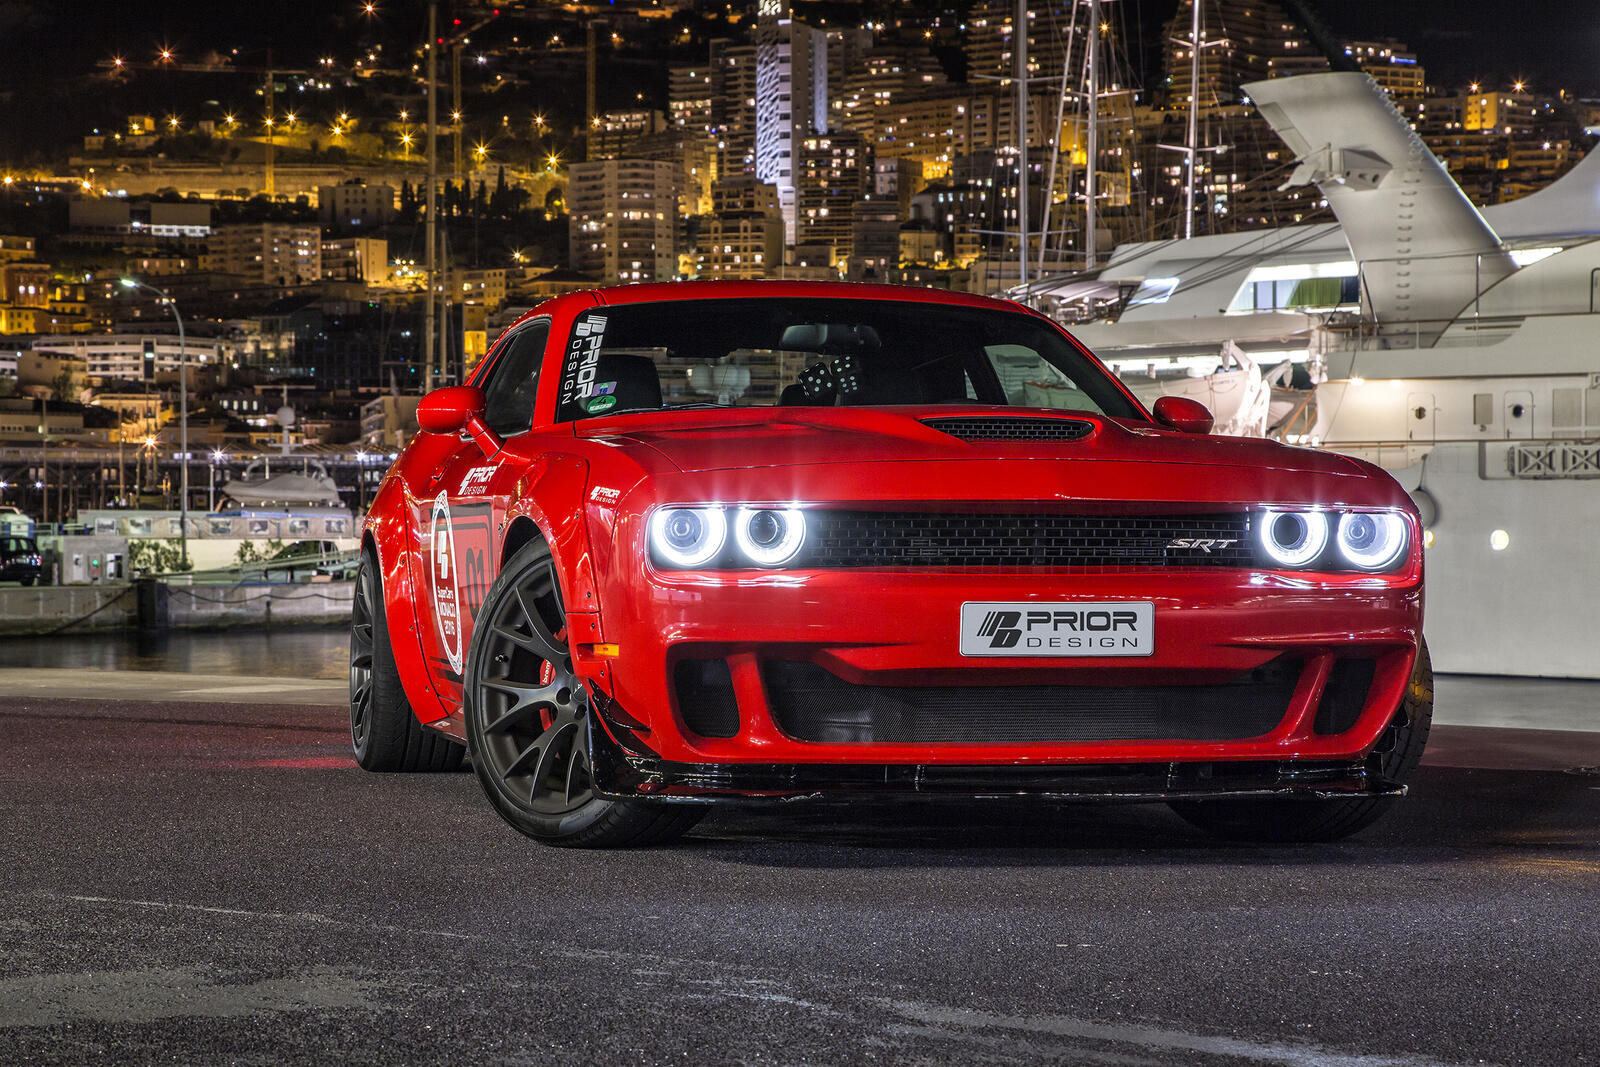 Free photo A red 2019 Dodge Challenger Srt Hellcat Widebody